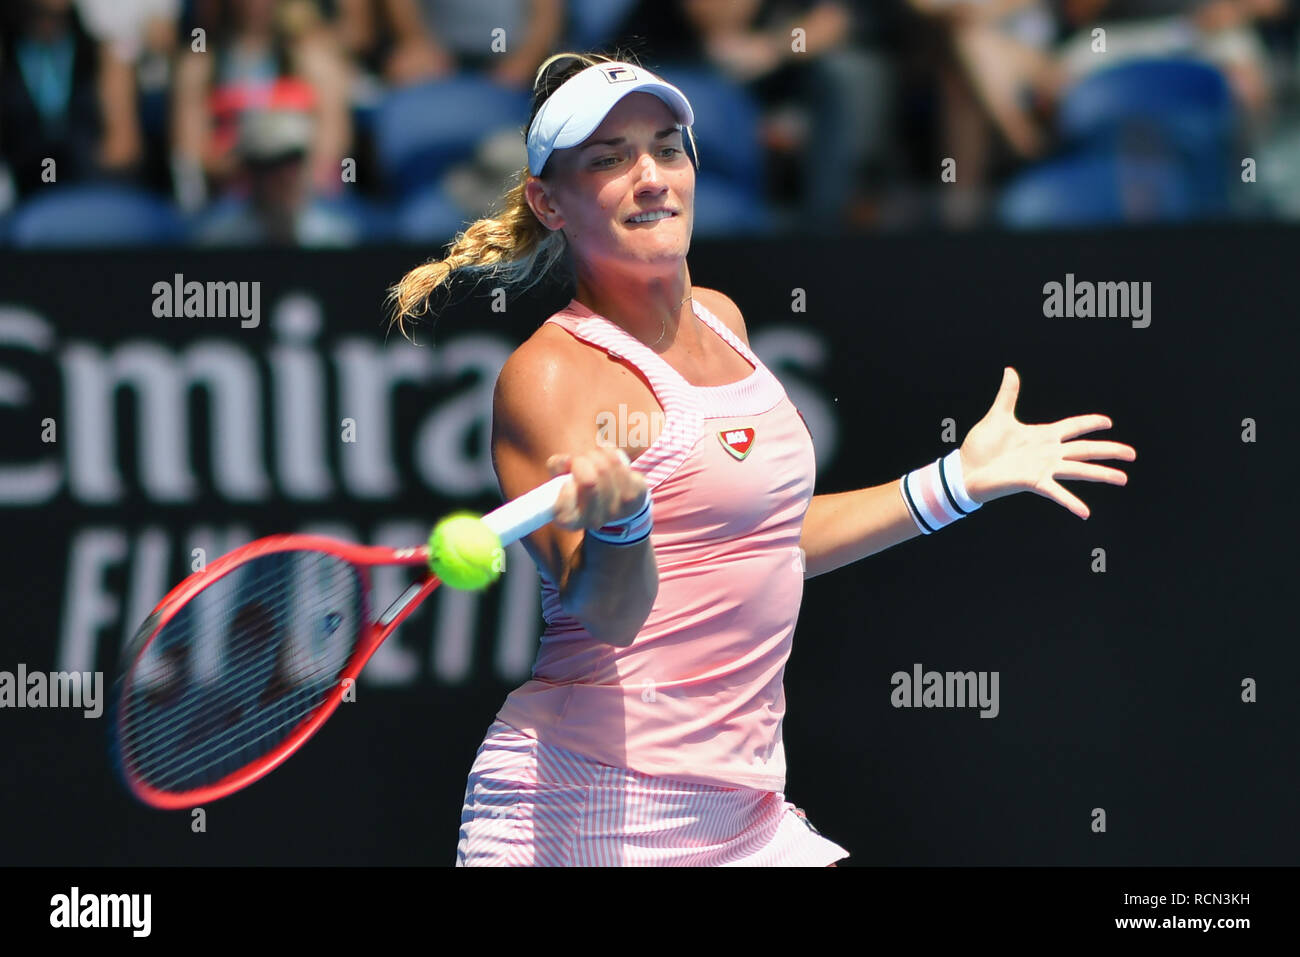 Melbourne, Australia. 16th Jan, 2019. Timea Babos of Hungary in action in the second round match against 5th seed Sloane Stephens from the USA on day three of the 2019 Australian Open Grand Slam tennis tournament in Melbourne, Australia. Credit: Cal Sport Media/Alamy Live News Stock Photo